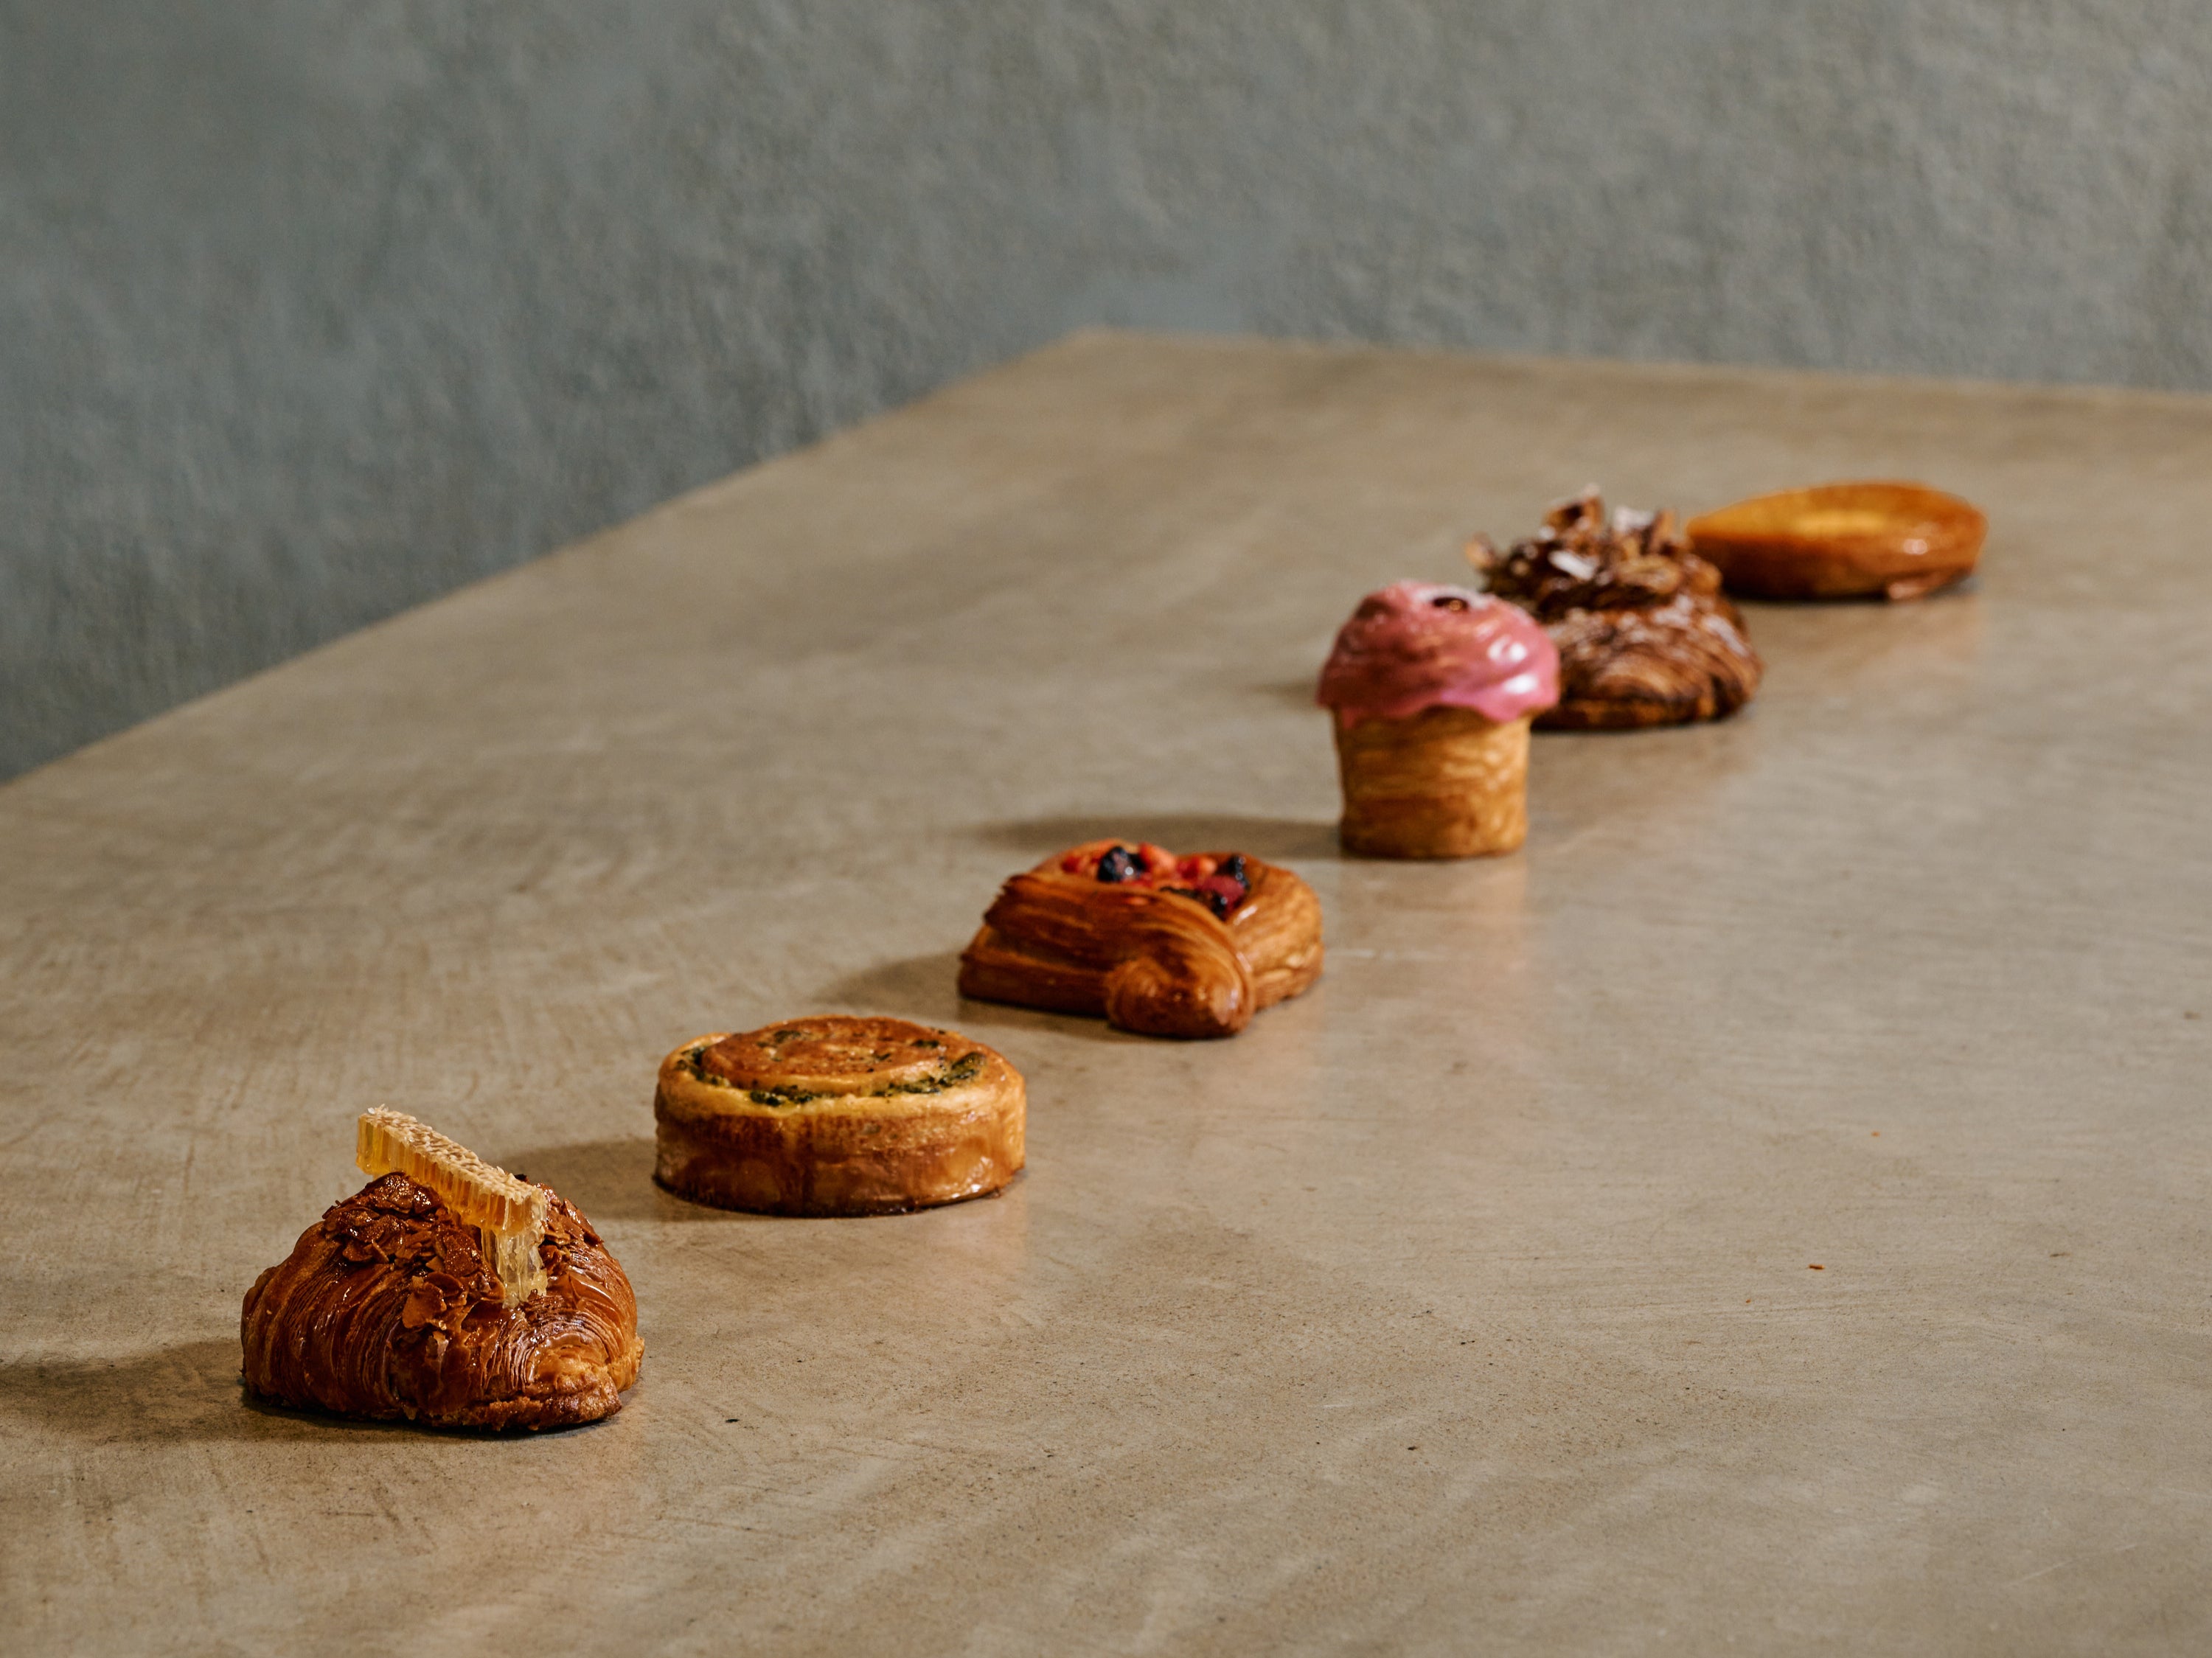 Pastries are the order of the day at Lune